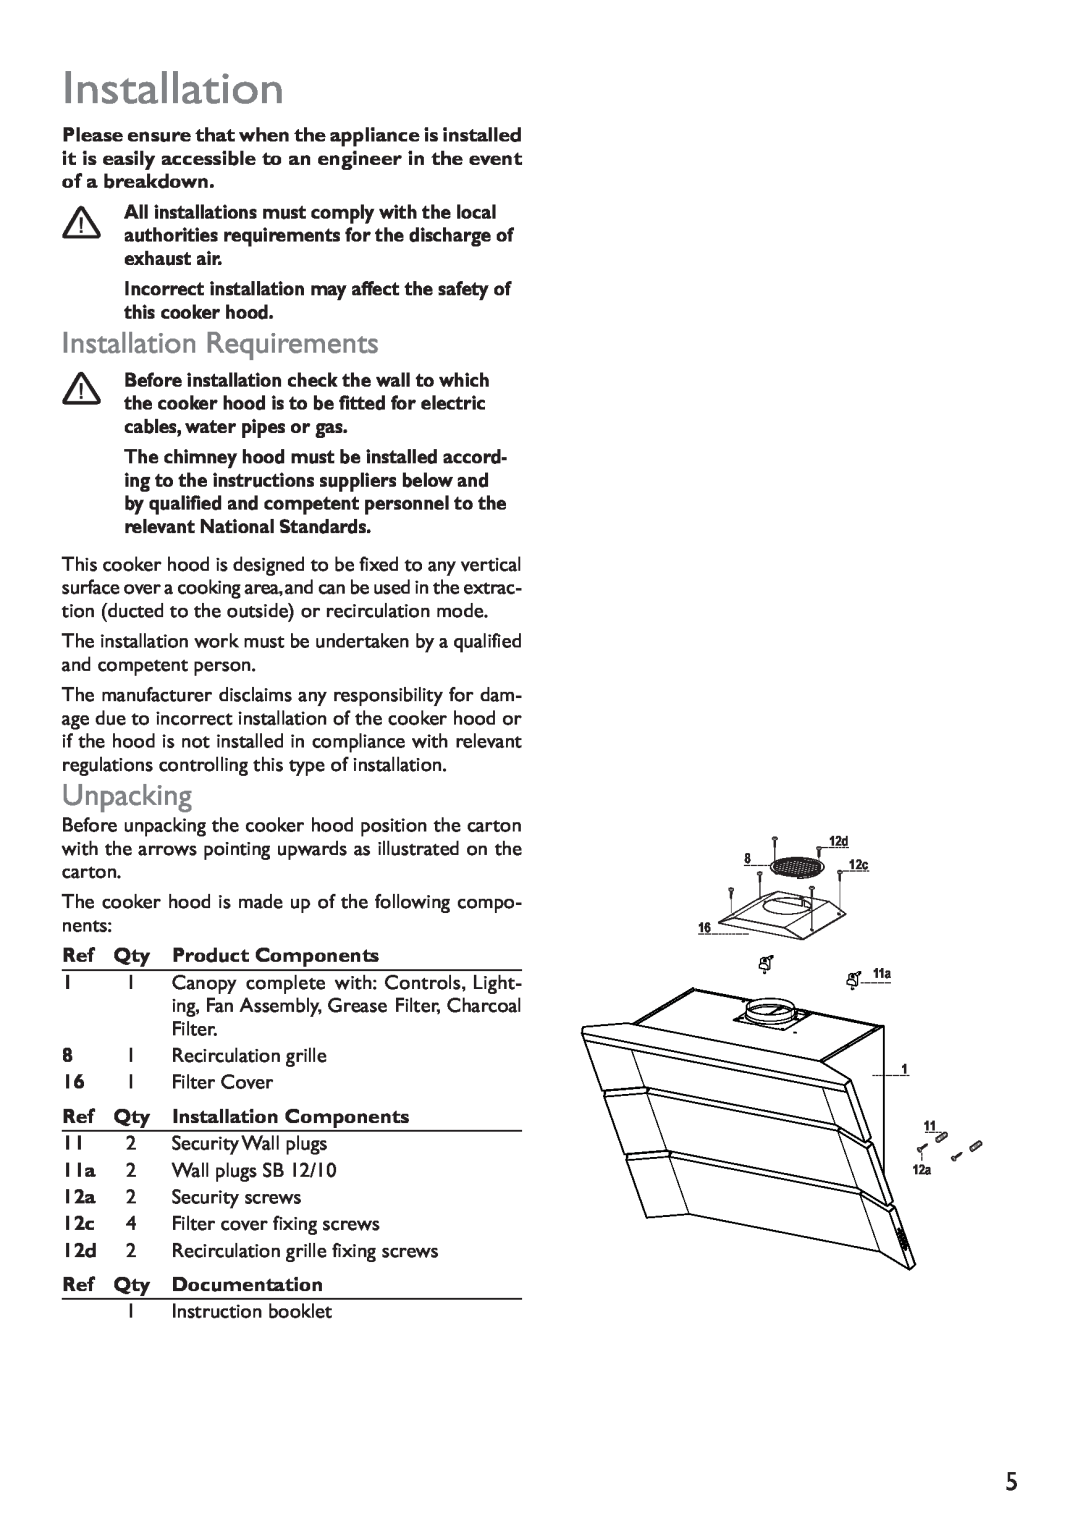 John Lewis JLBIHD908 instruction manual Installation Requirements, Unpacking, exhaust air, Ref Qty Product Components 